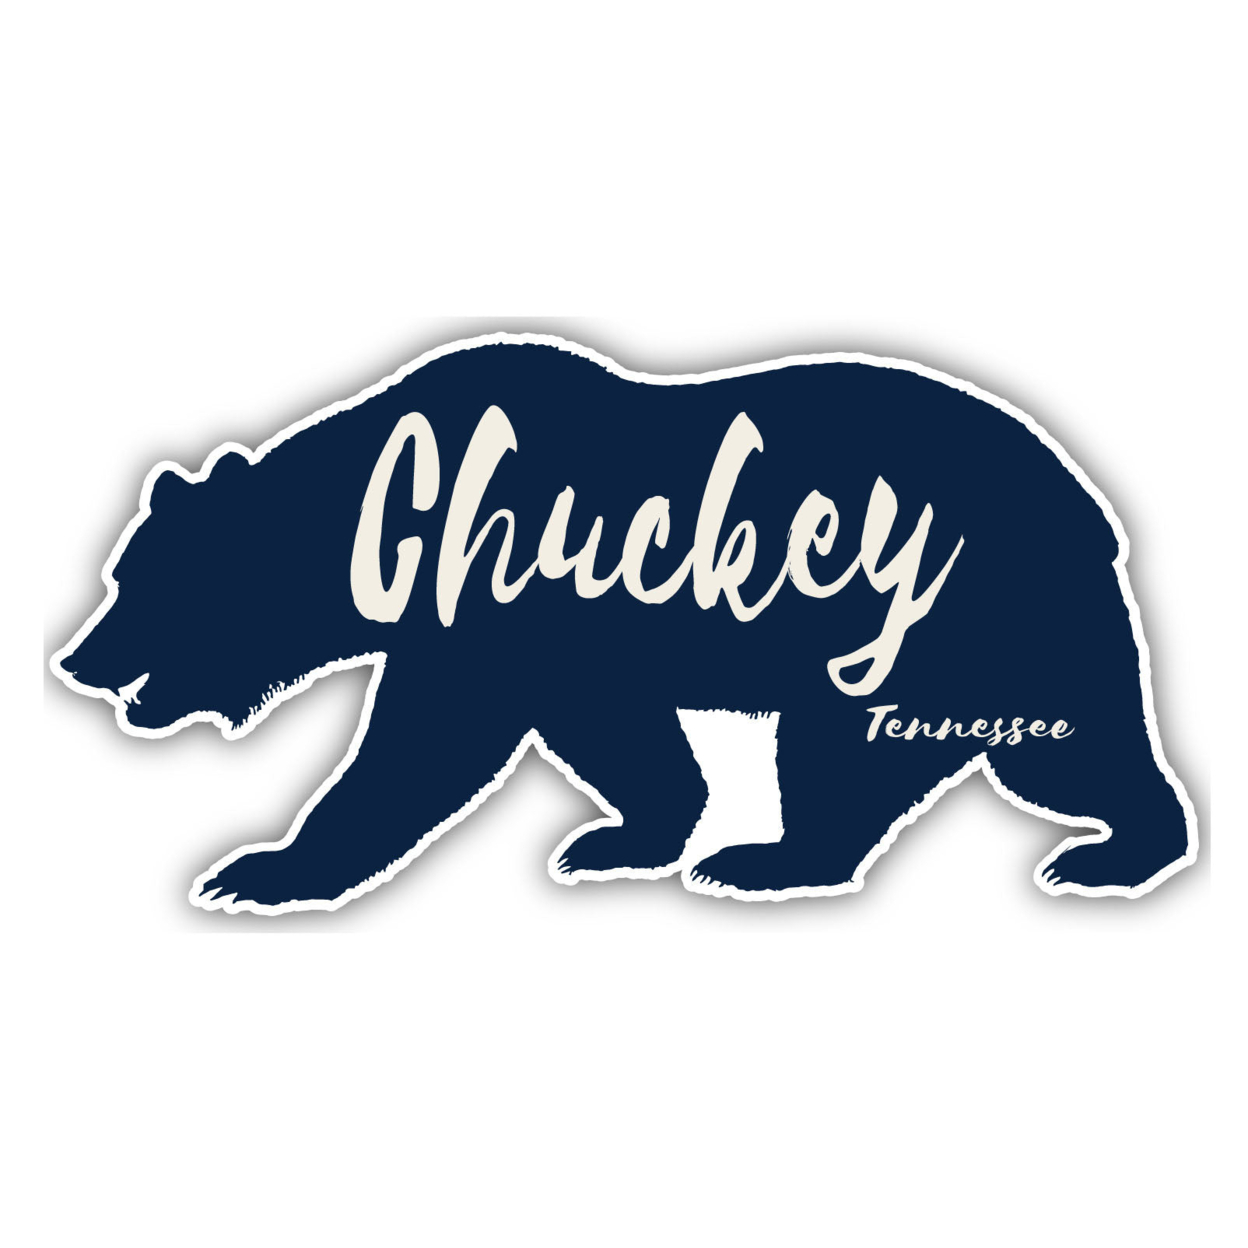 Chuckey Tennessee Souvenir Decorative Stickers (Choose Theme And Size) - Single Unit, 10-Inch, Bear